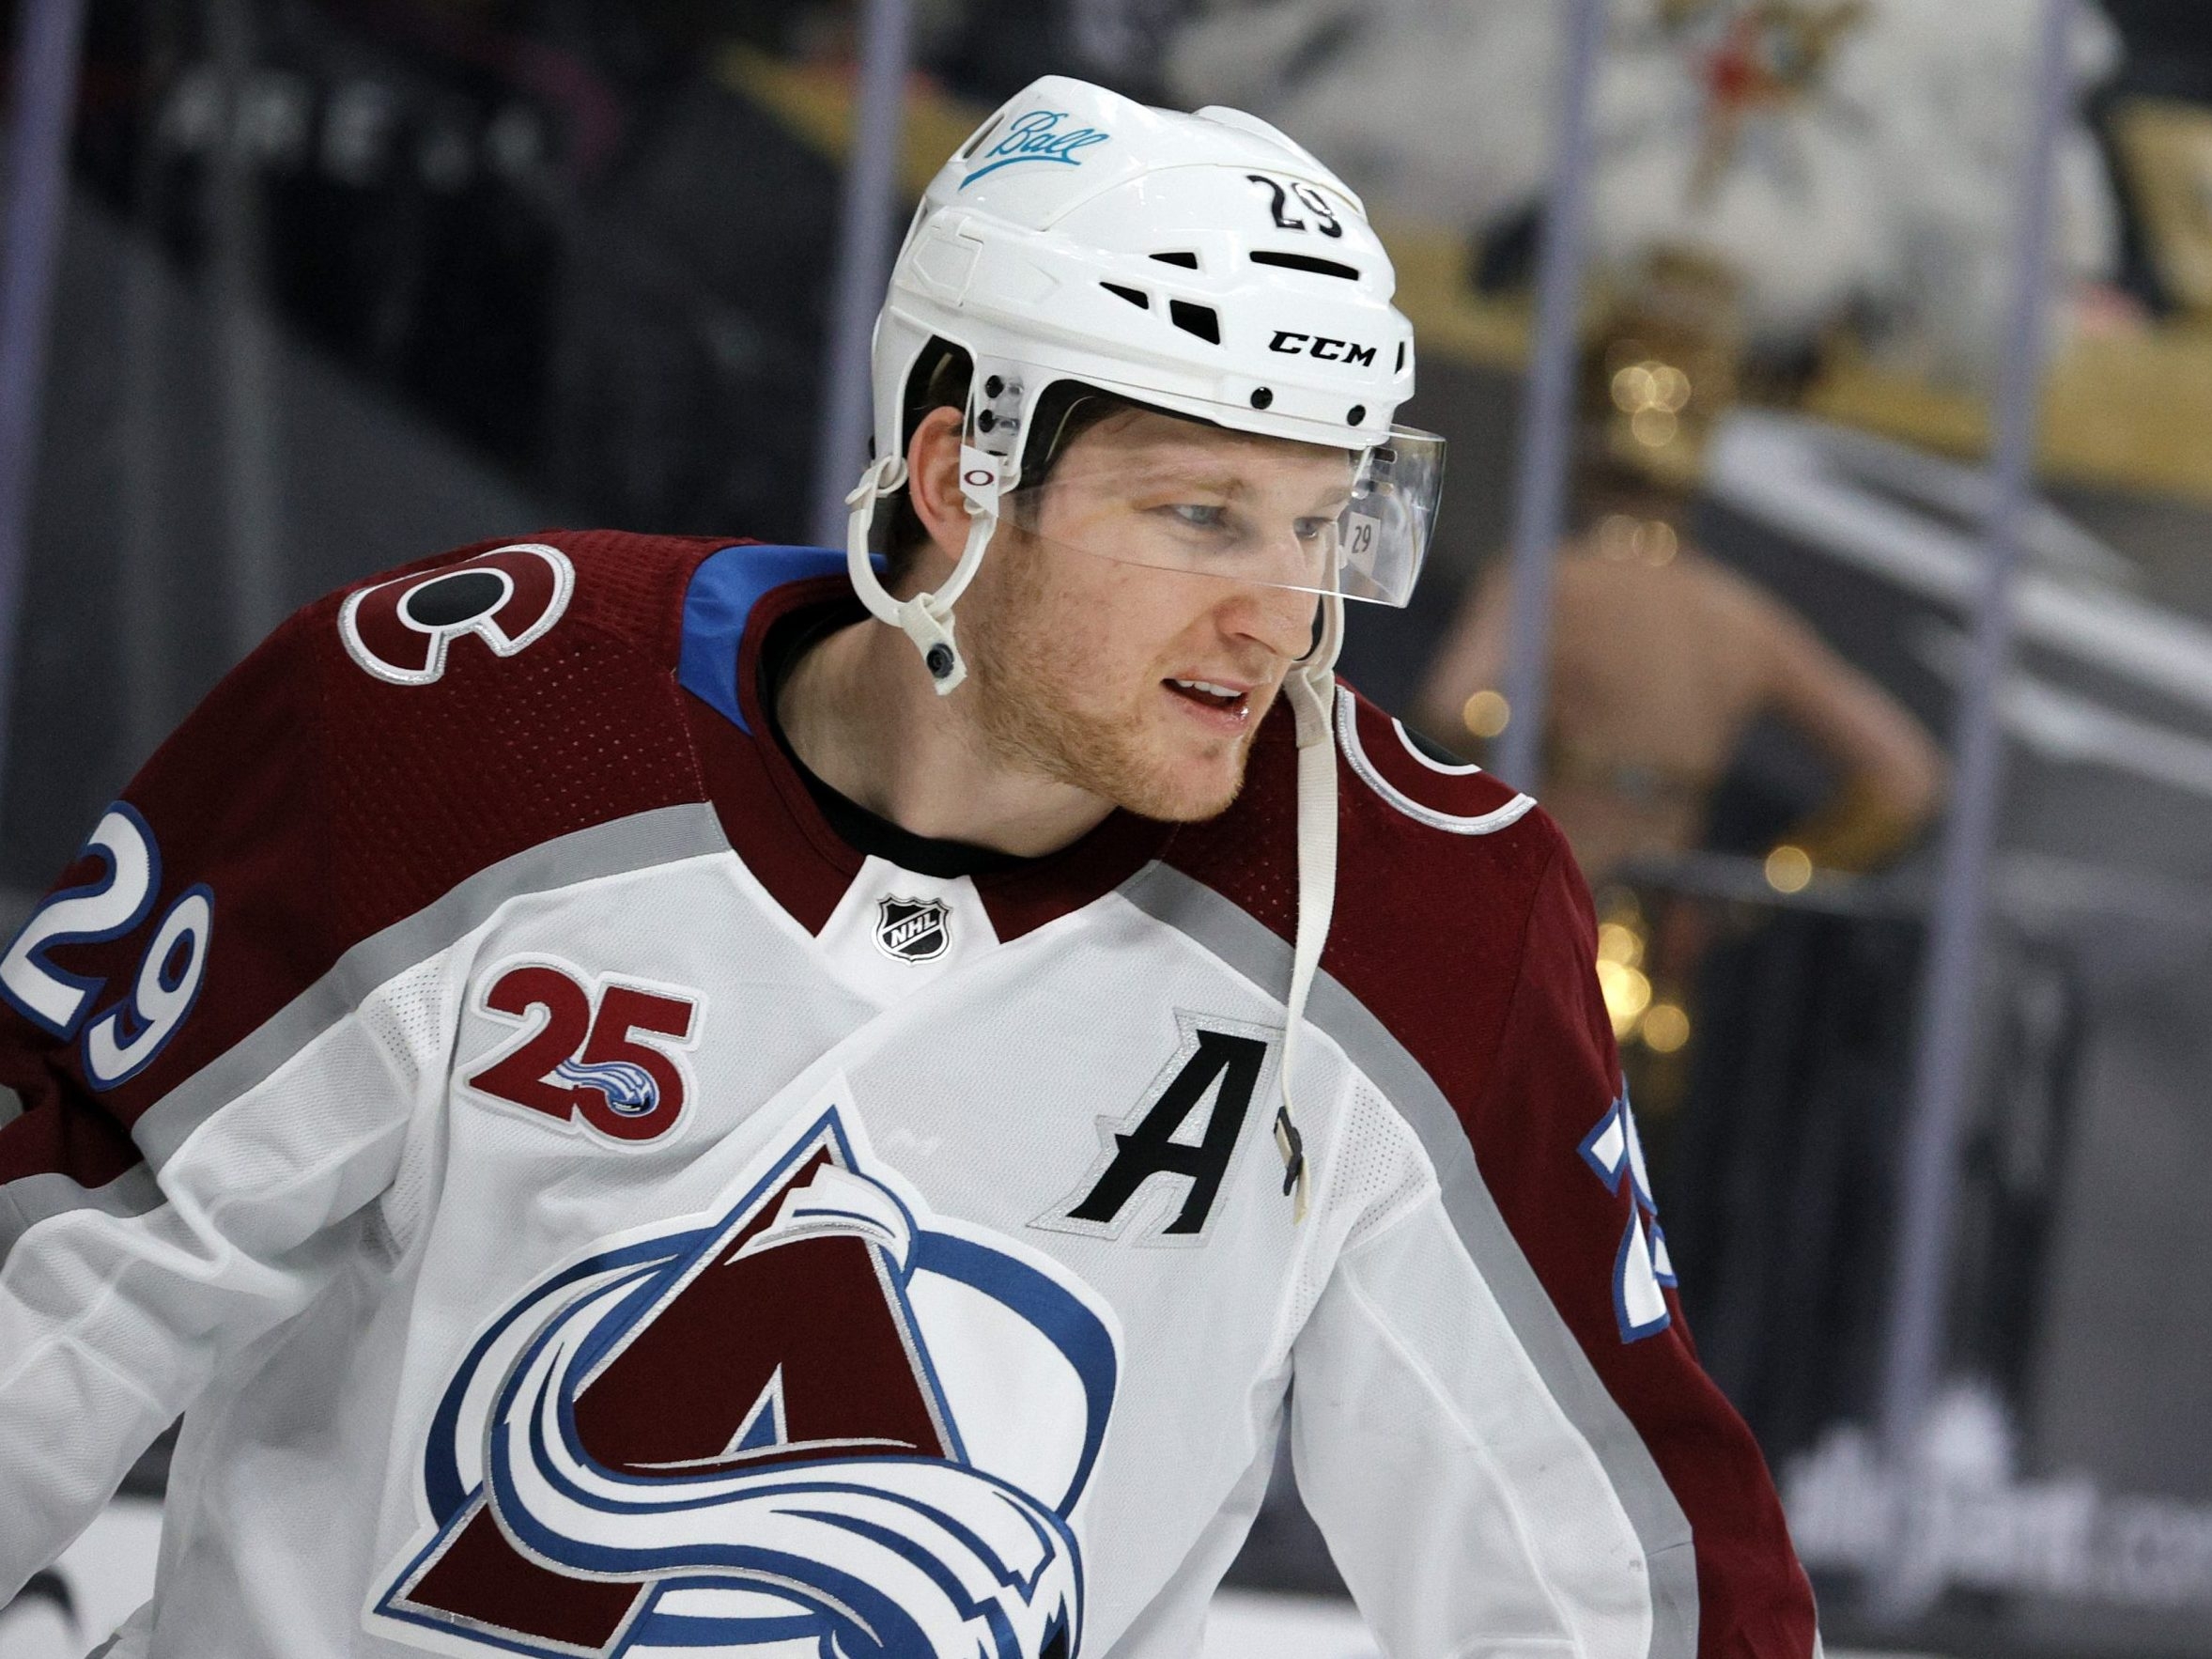 How old is NHL star Nathan MacKinnon?